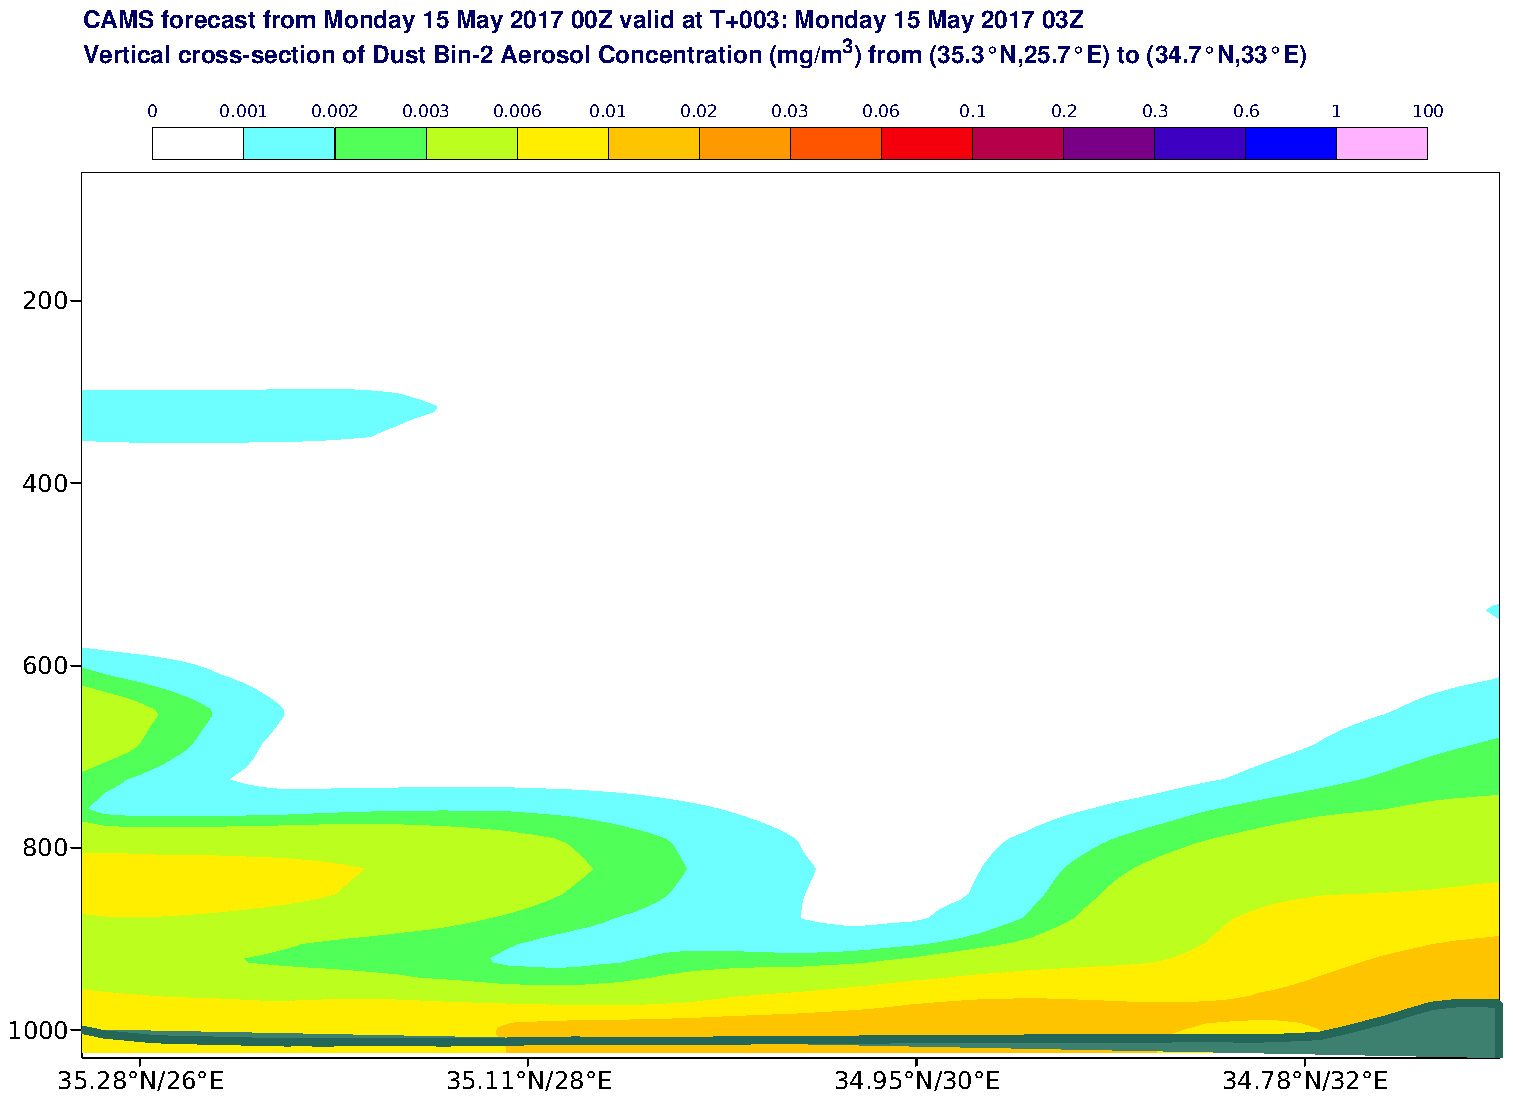 Vertical cross-section of Dust Bin-2 Aerosol Concentration (mg/m3) valid at T3 - 2017-05-15 03:00